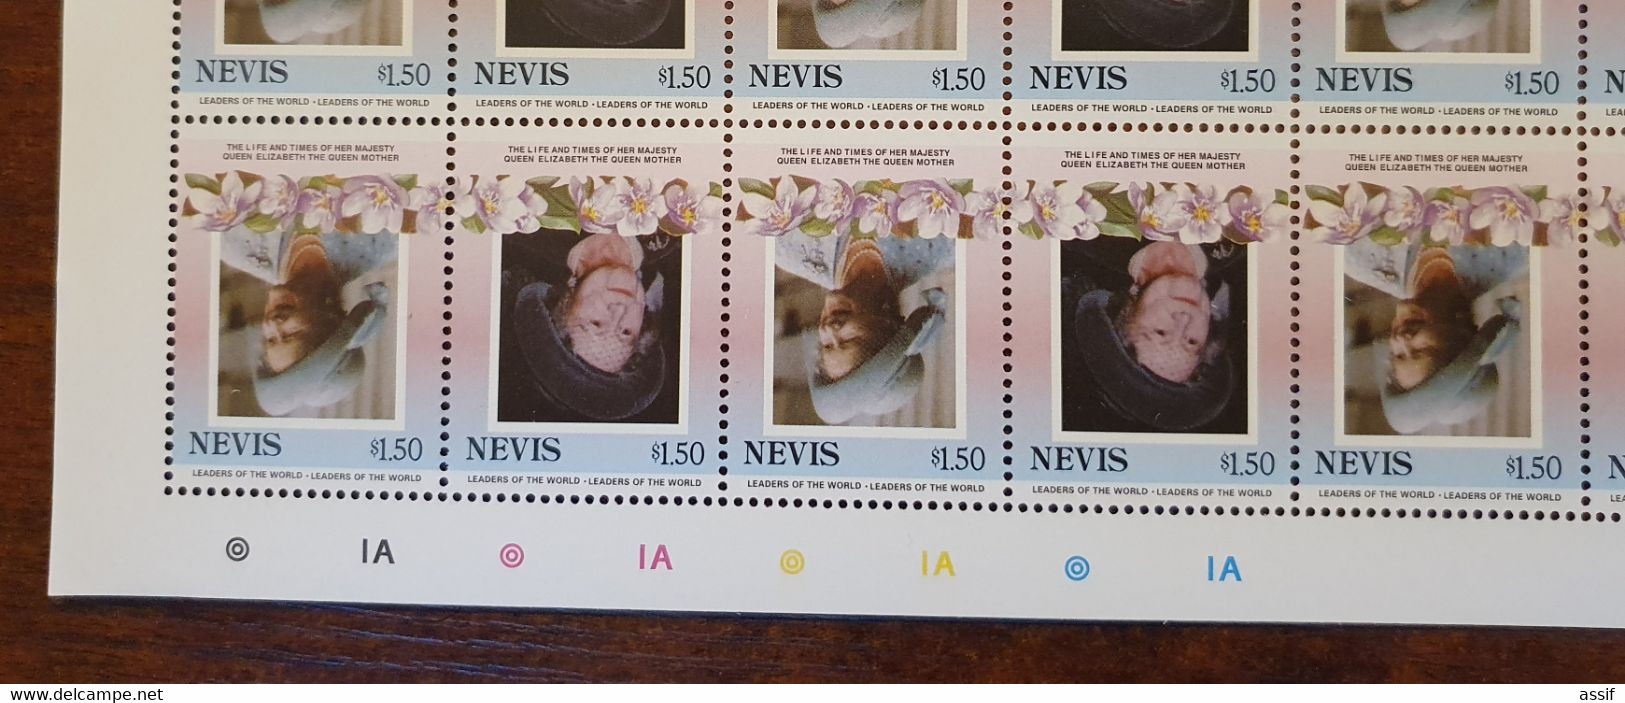 NEVIS 1,50$ 1985 FEUILLE ENTIERE CENTRE RENVERSE SHEET INVERTED YT 317 Et 318 50 TIMBRES NEUFS ** /FREE SHIPPING R - St.Kitts And Nevis ( 1983-...)